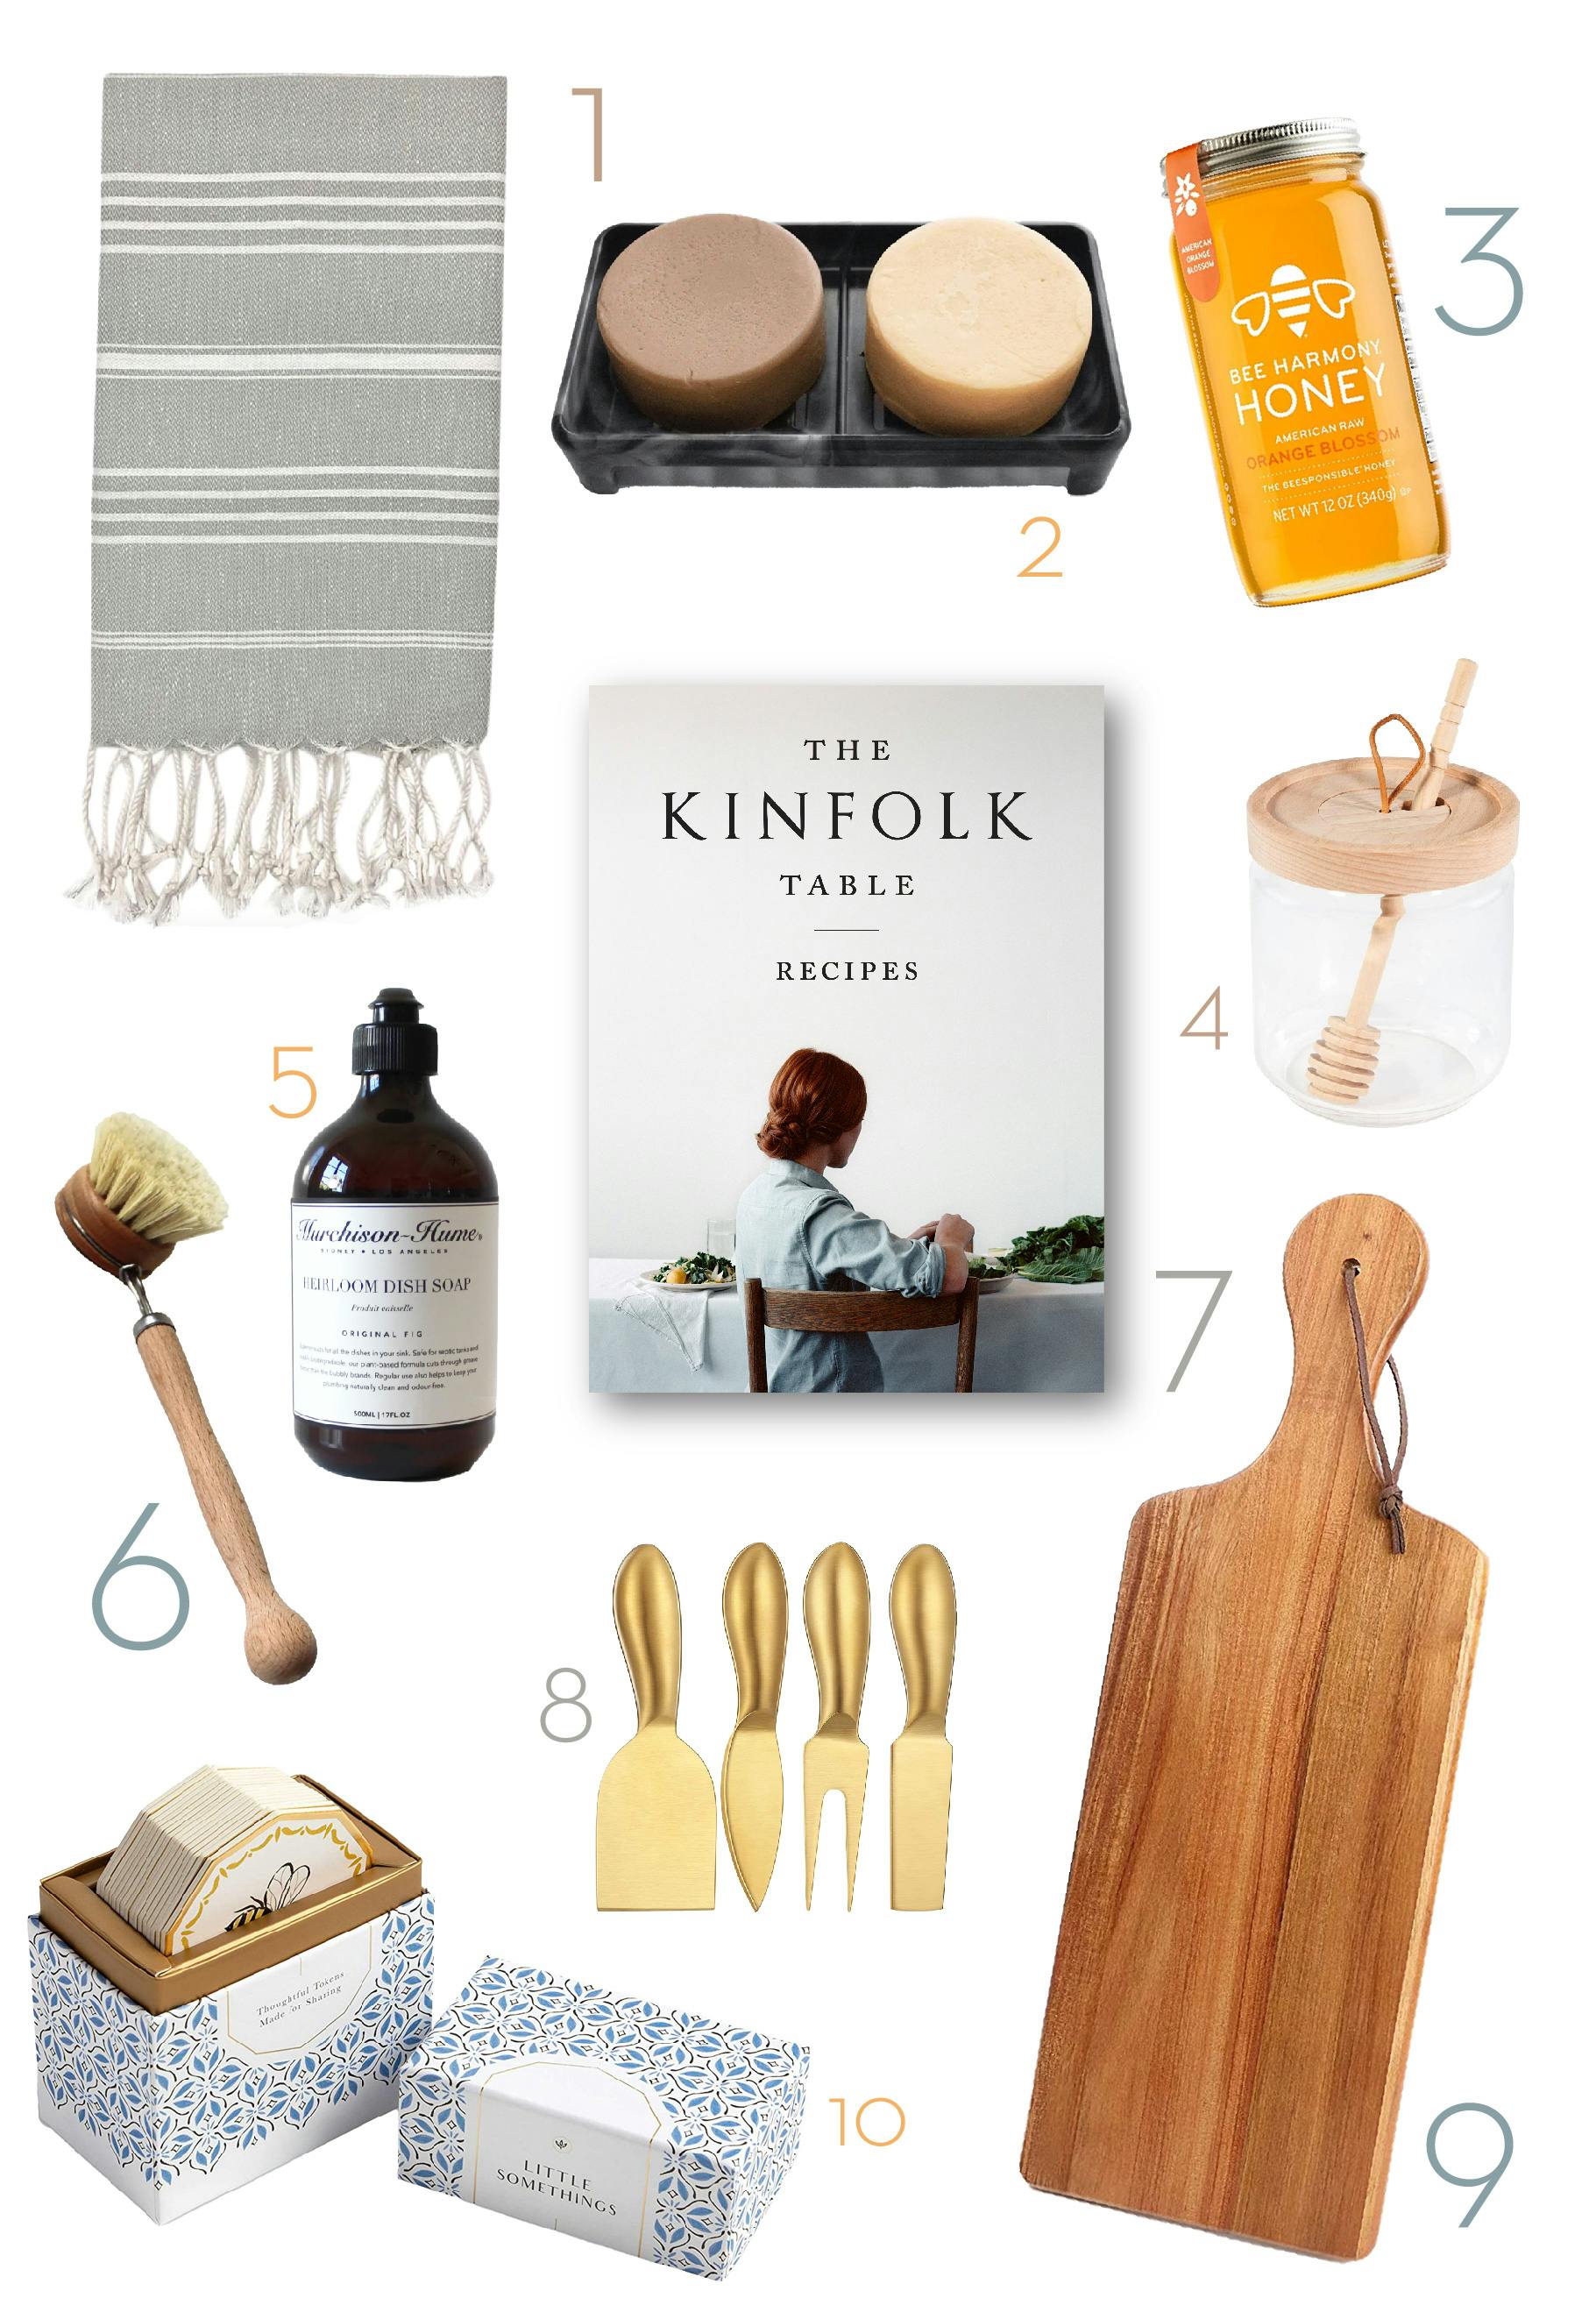 10 Best Gifts for Hosts Under $25
